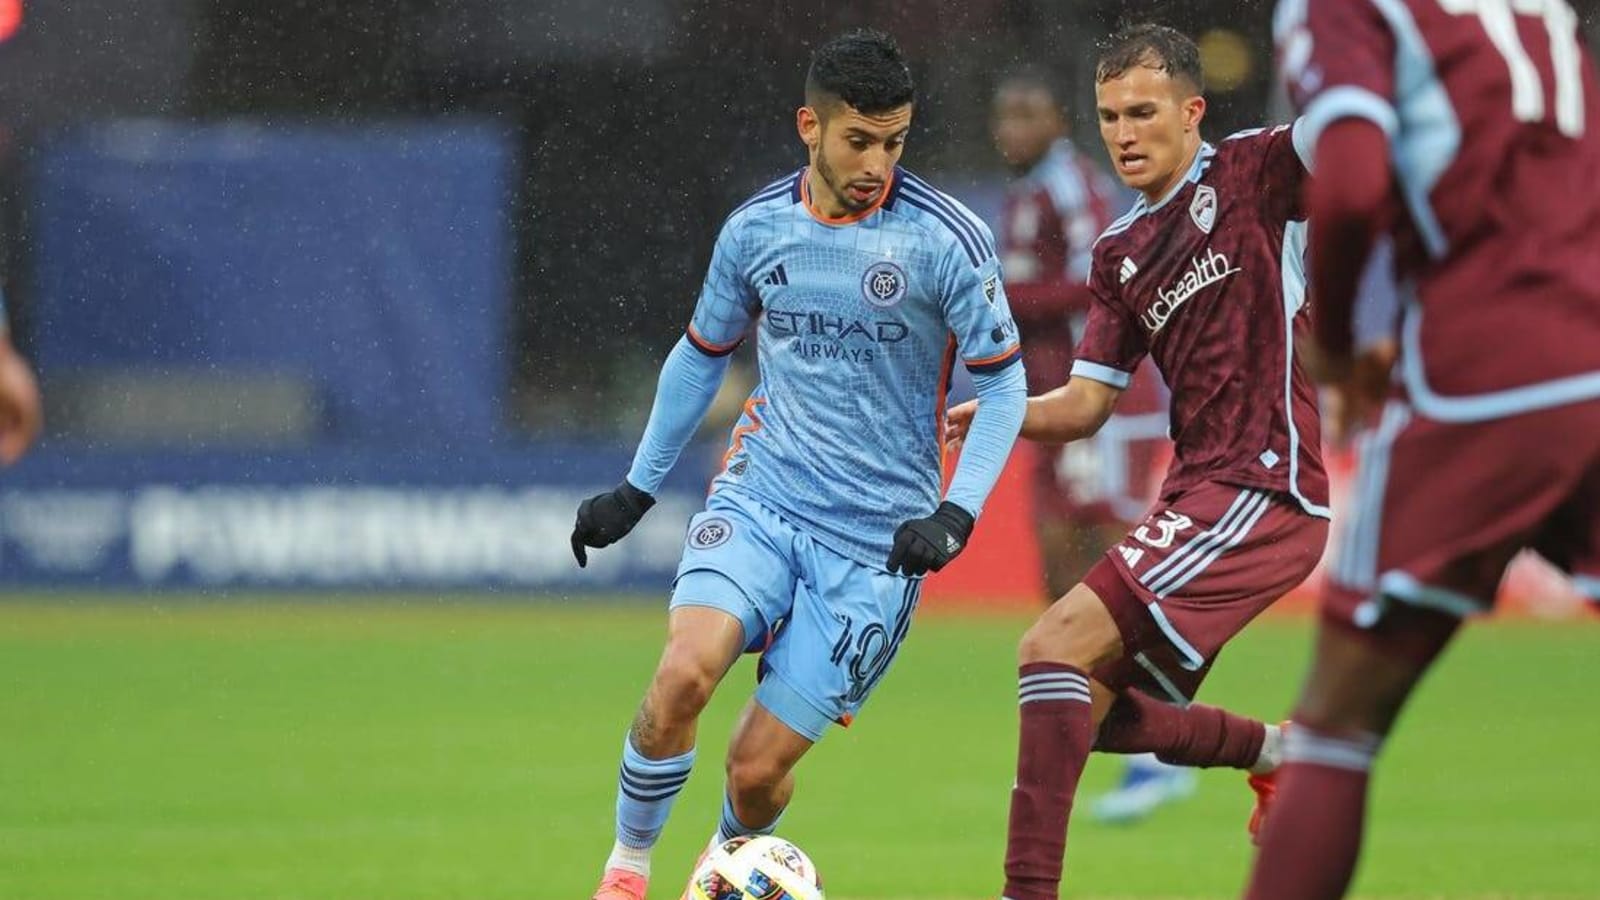 NYCFC hopes for break from road woes in match vs. Toronto FC